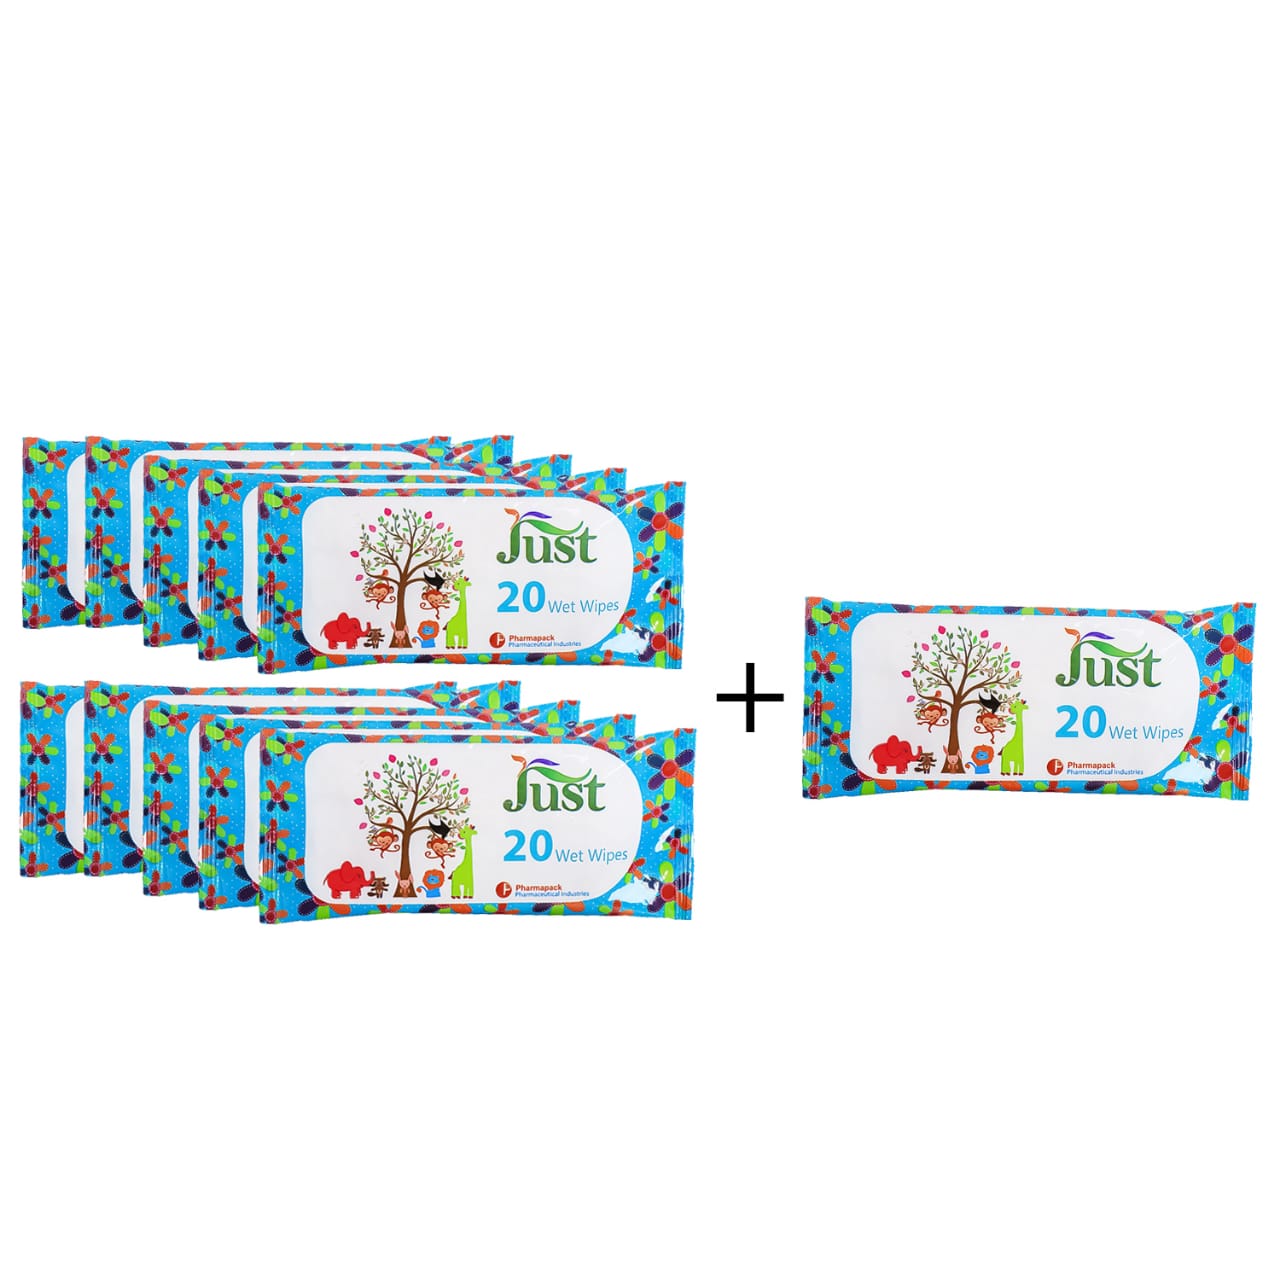 wet wipes (20)to care children